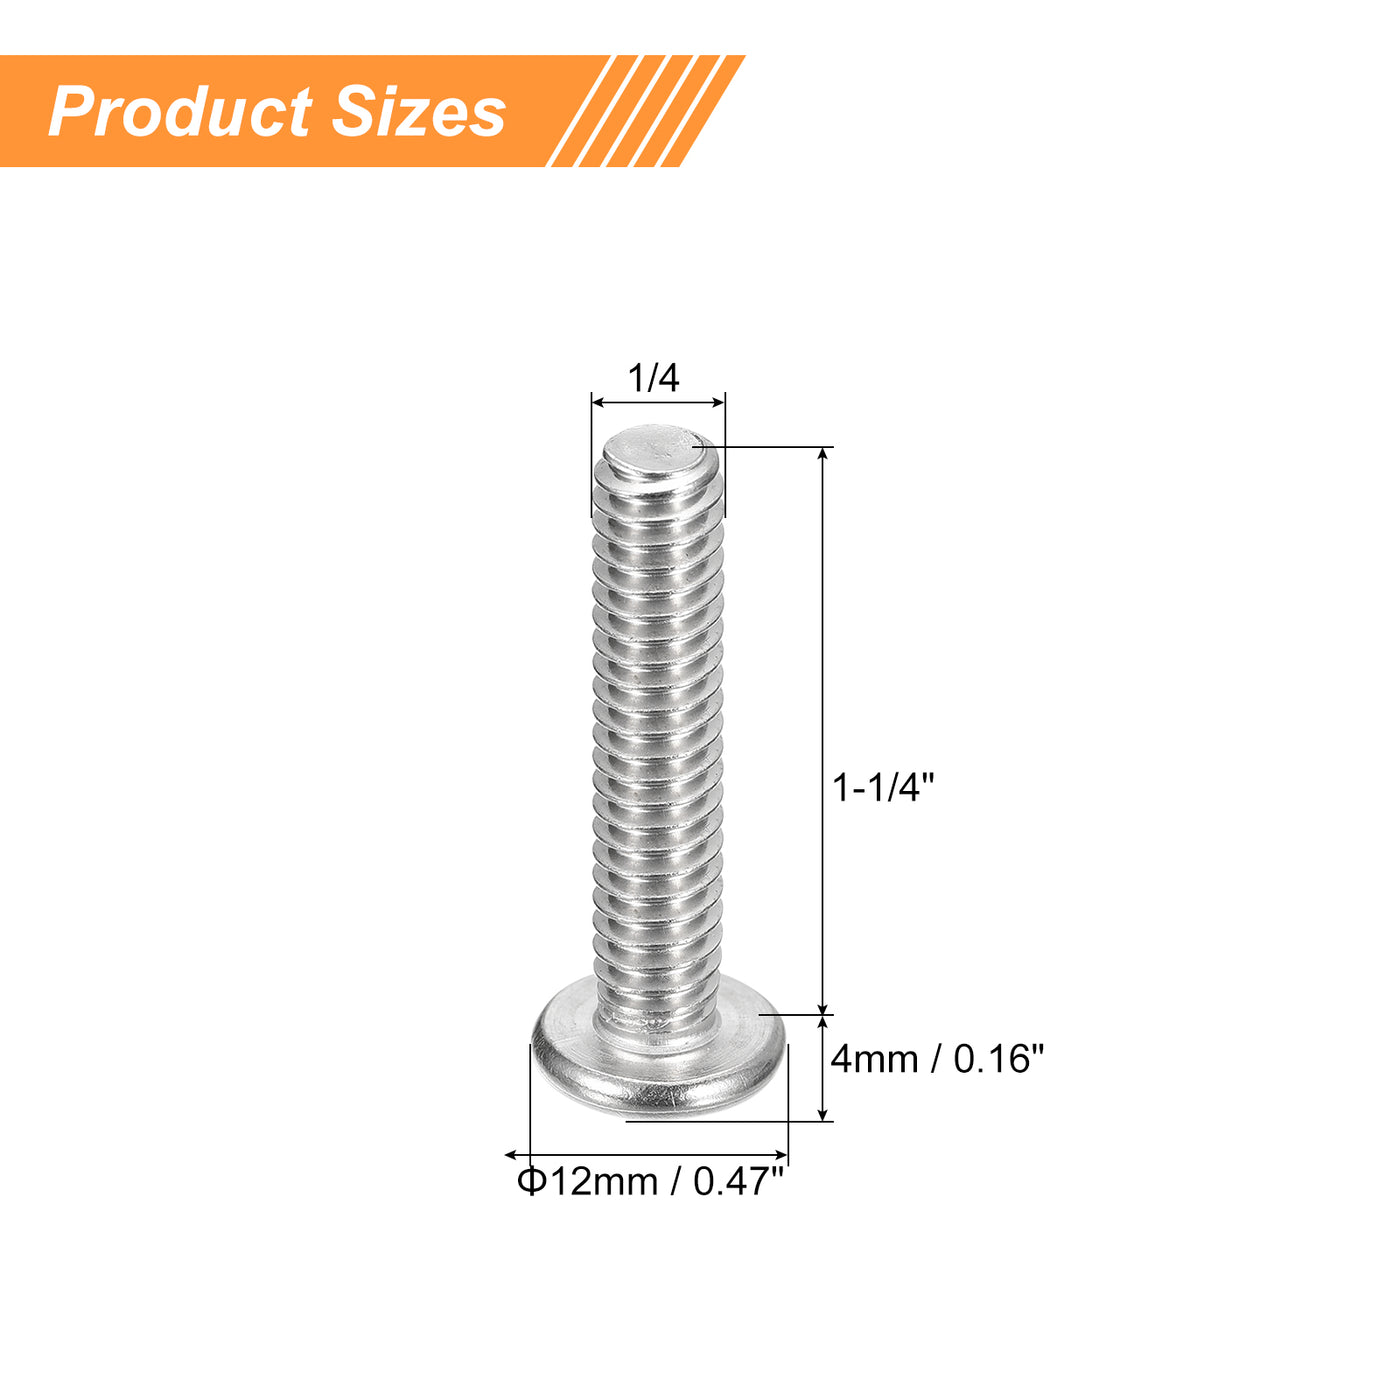 uxcell Uxcell 1/4-20x1-1/4" Pan Head Machine Screws, Stainless Steel 18-8 Screw, Pack of 20